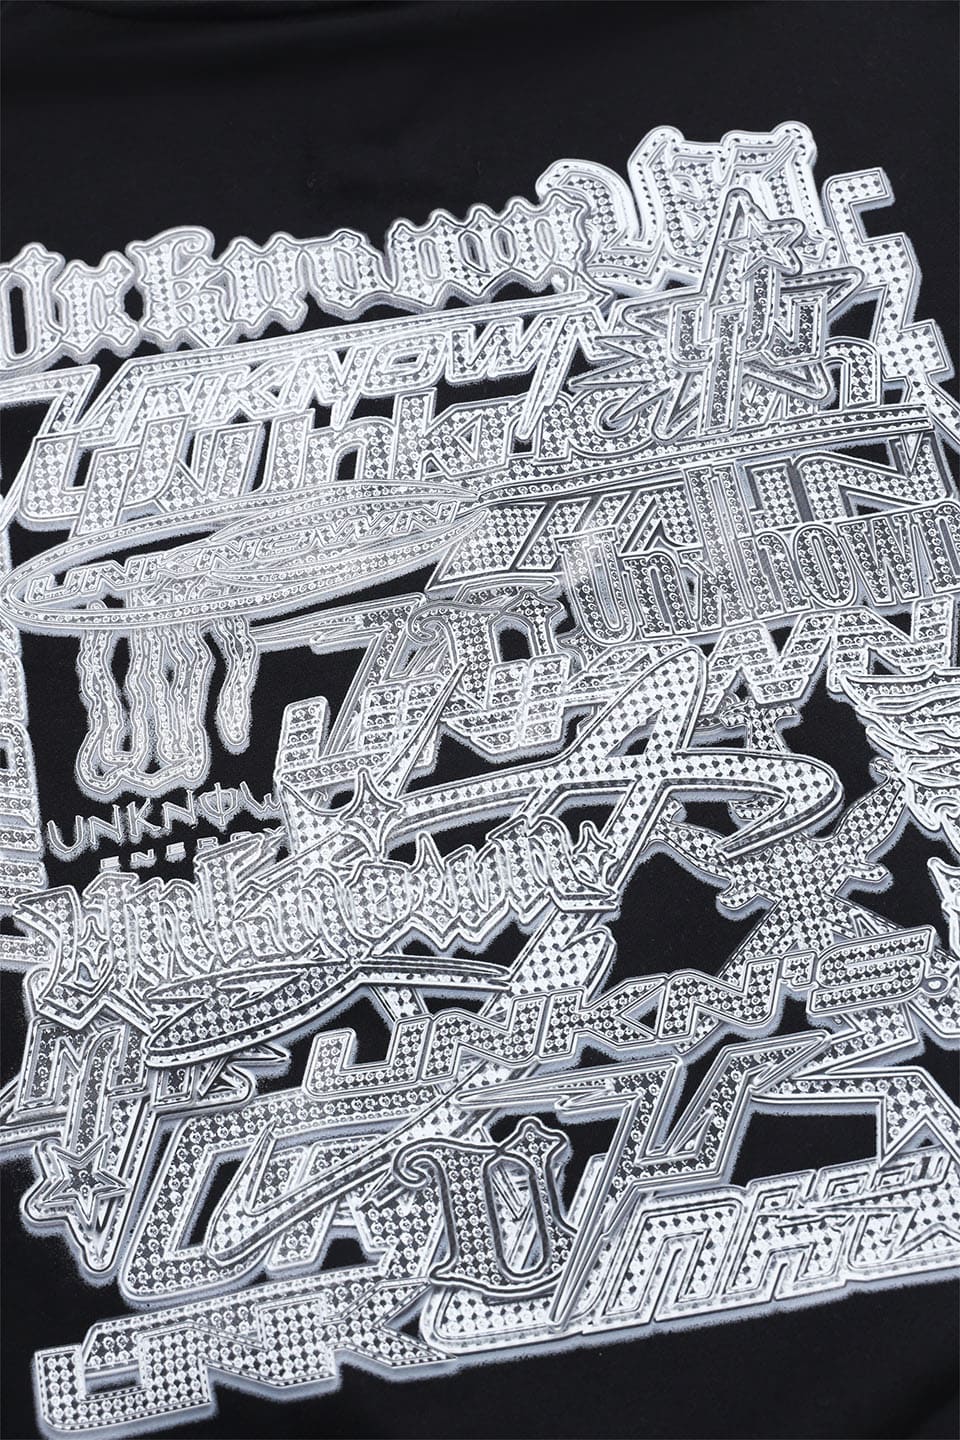 Multi Logo Iced Out Hoodie